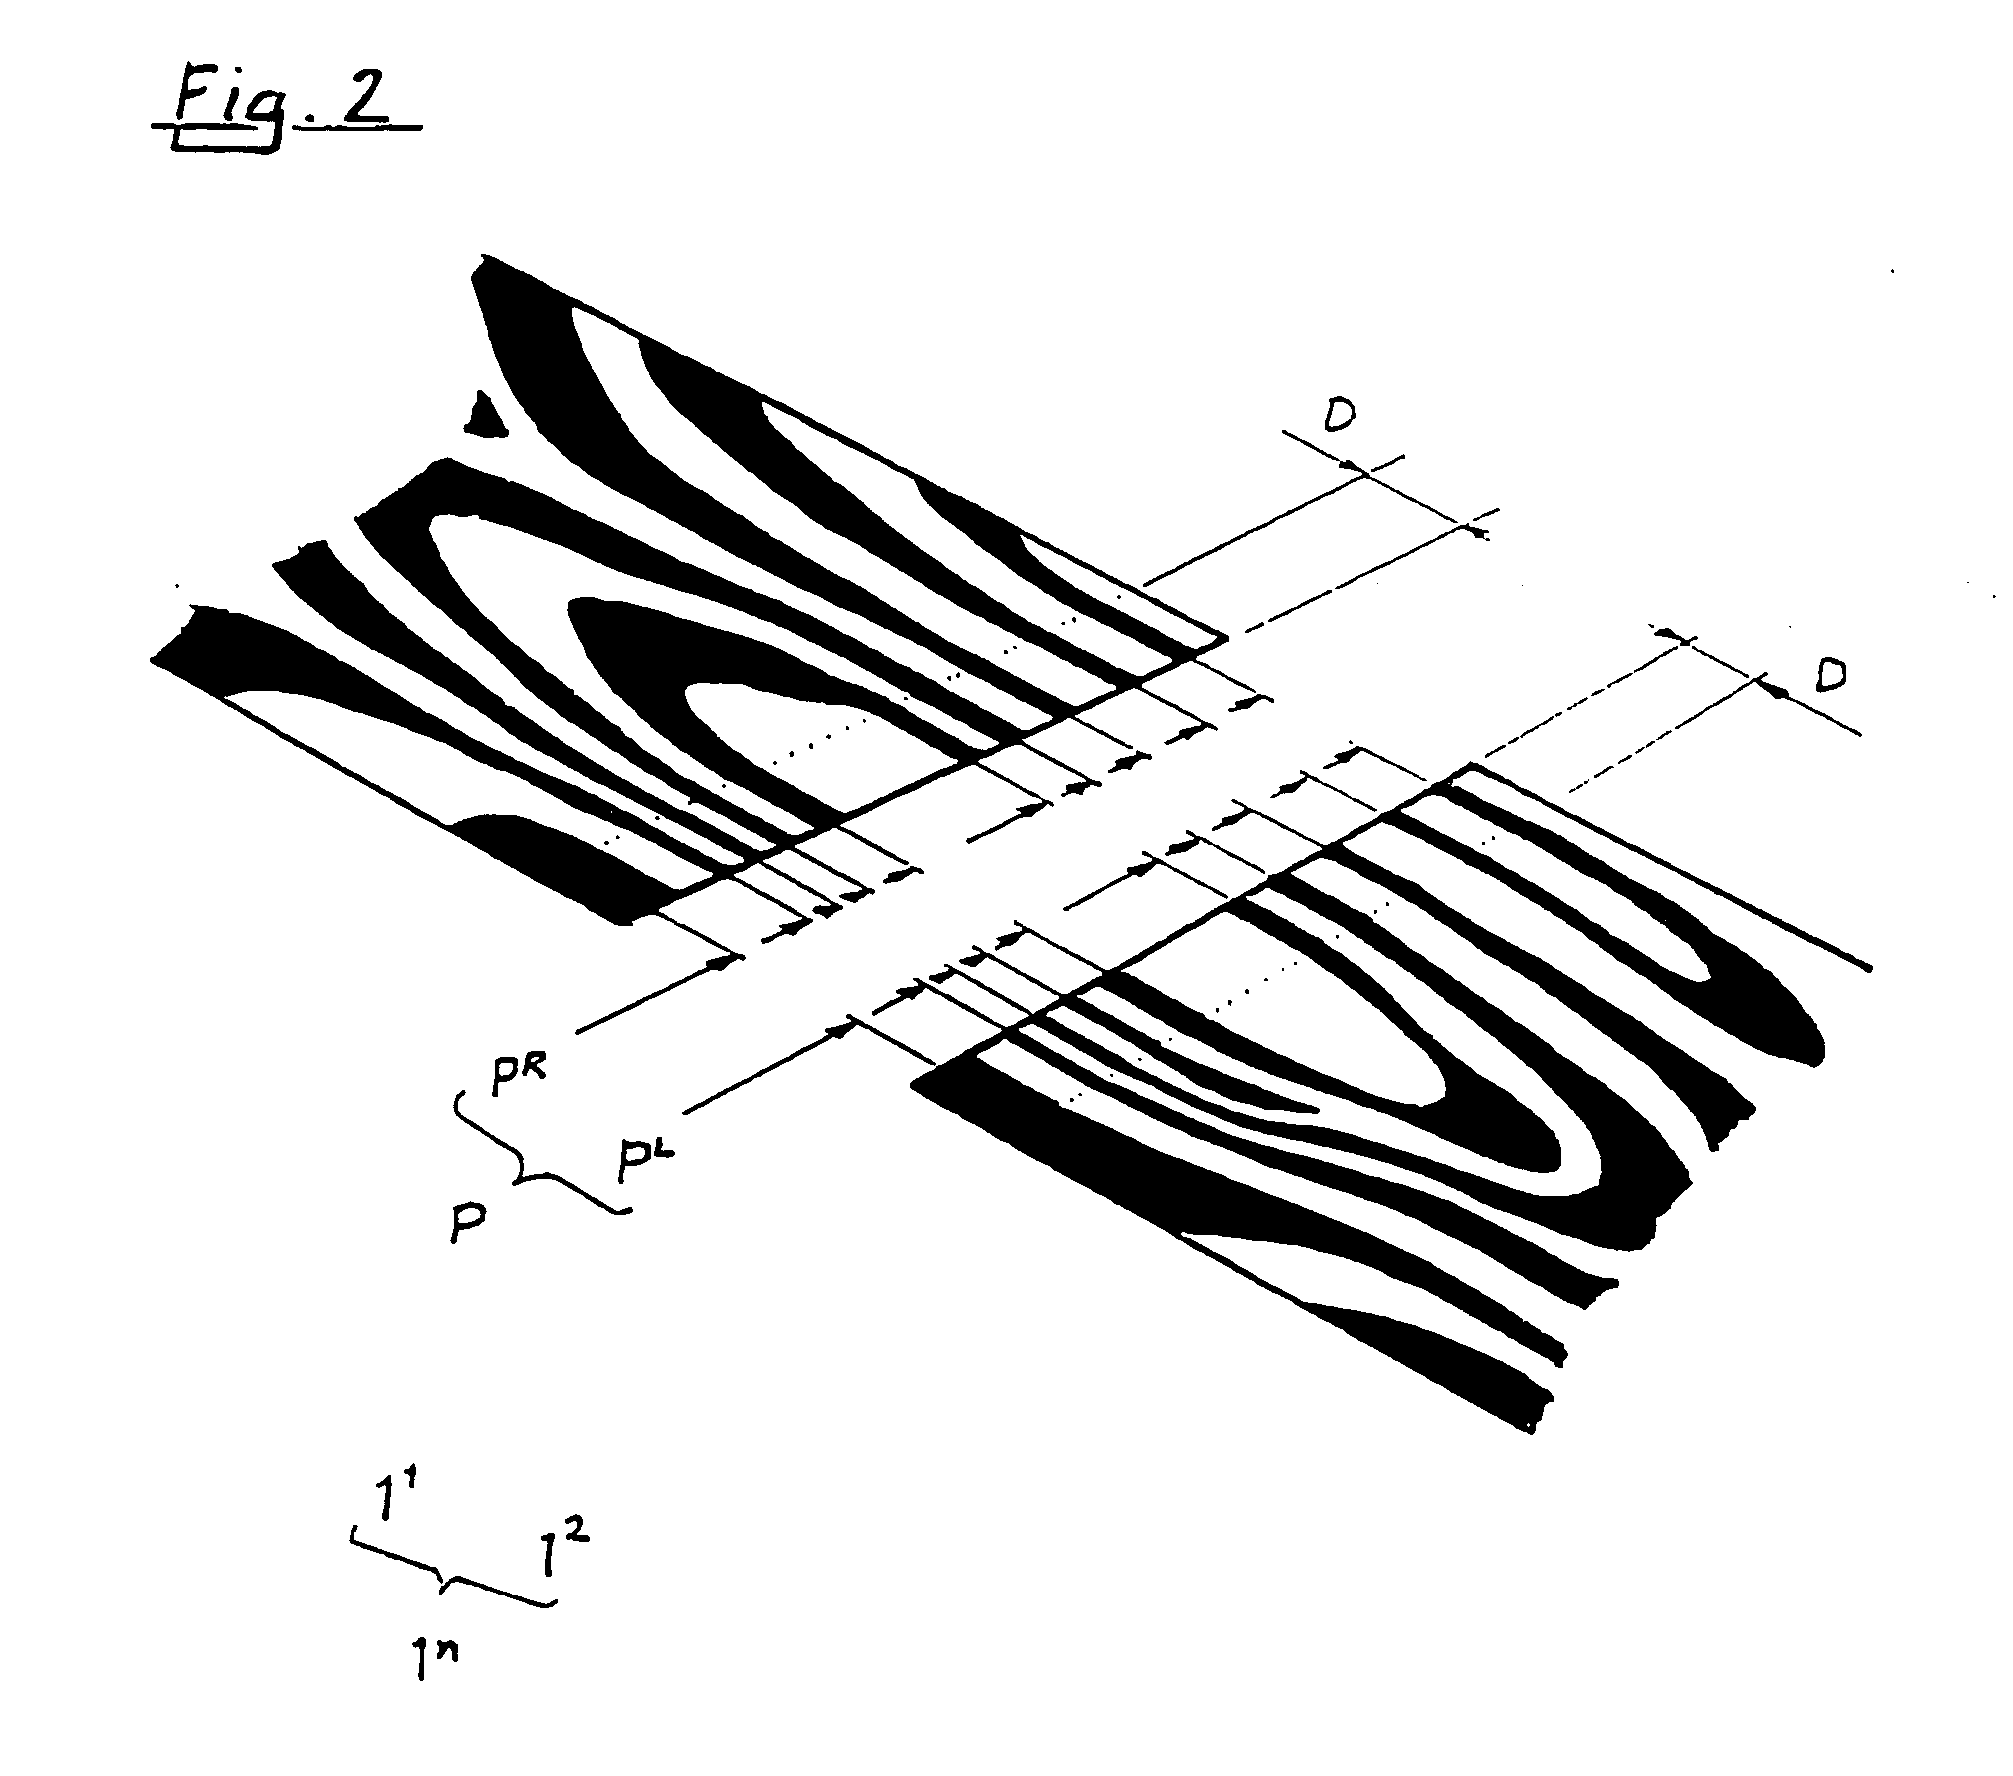 Process for the manufacturing of panels having a decorative surface